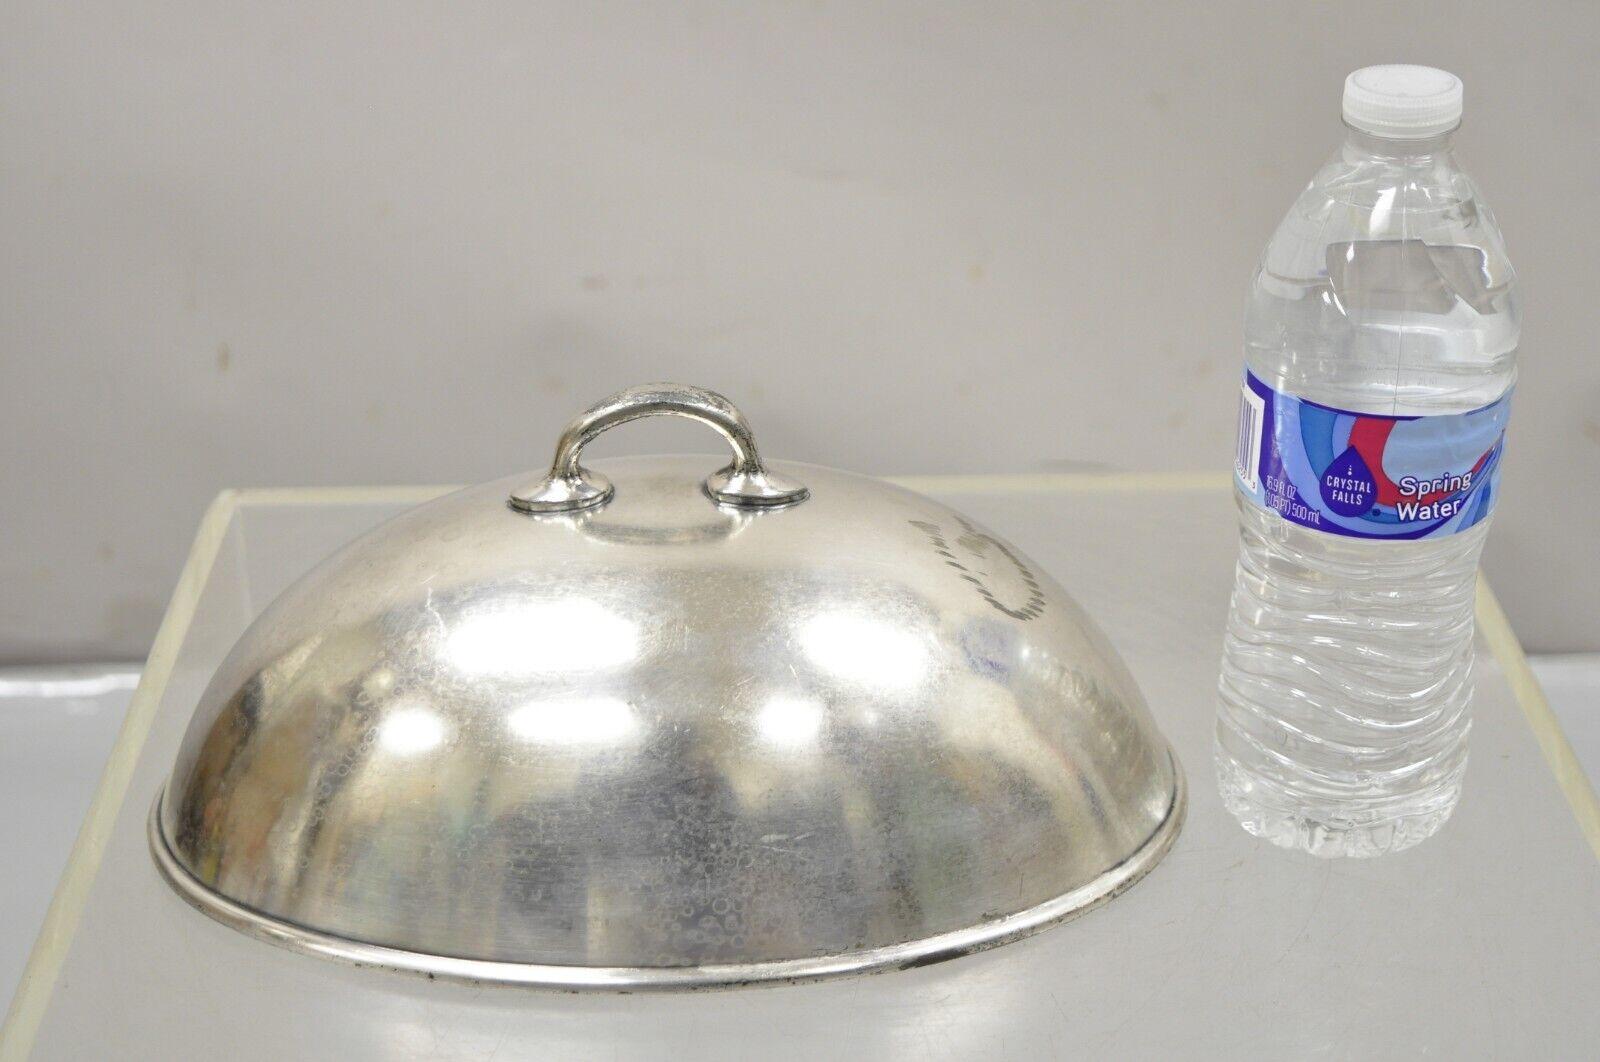 Antique Lexington Silver Plated Edwardian Small Oval Serving Platter Lid Dome. Circa Early to Mid 1900s. Measurements: 5